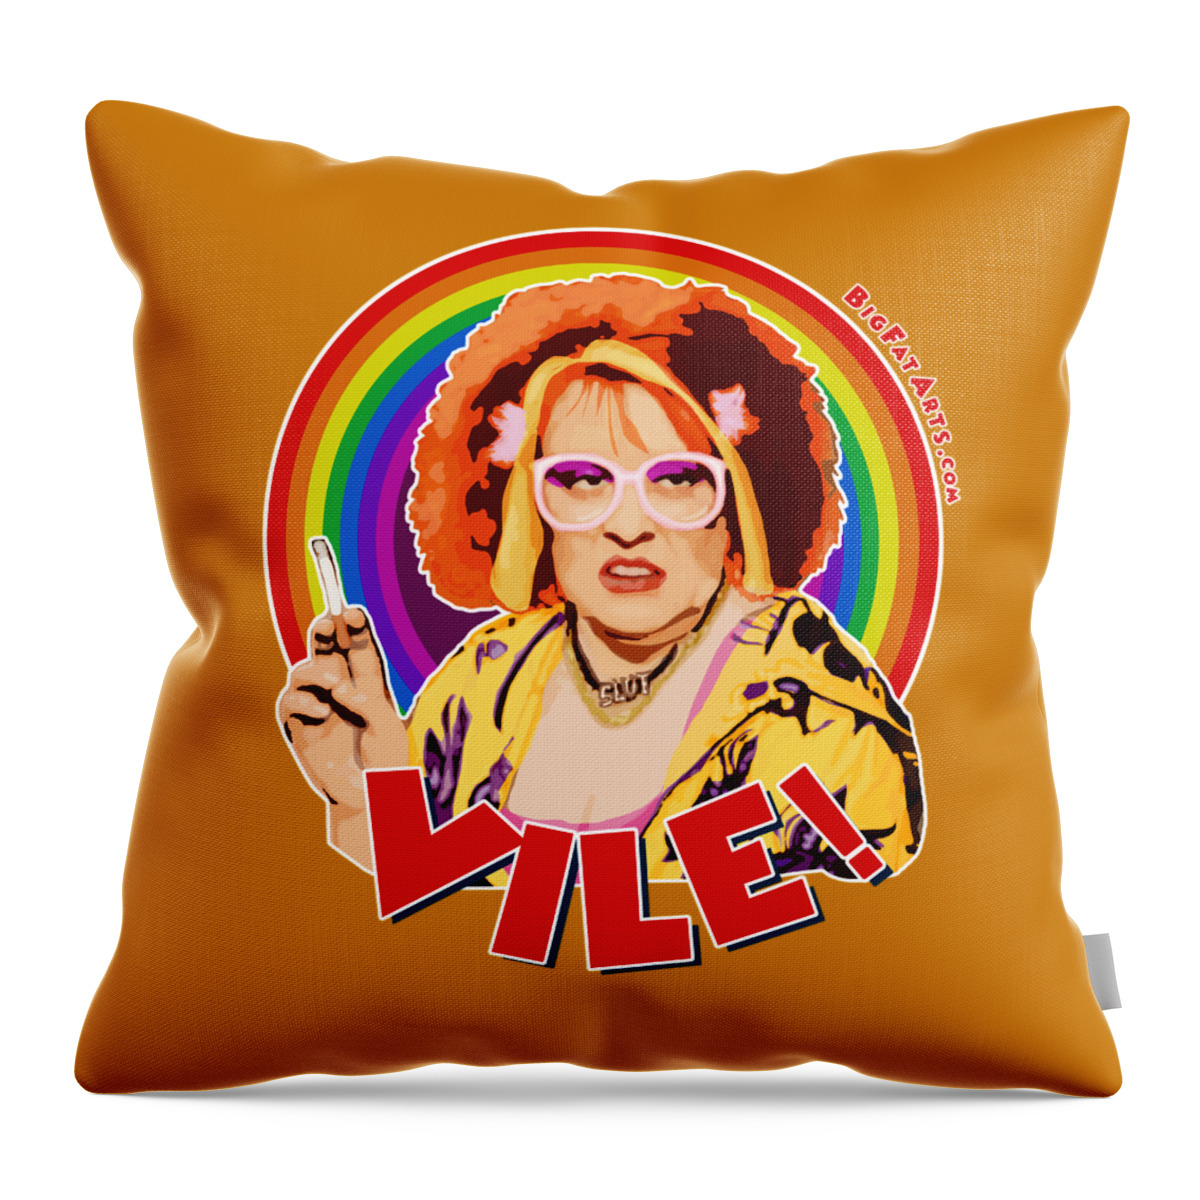 Auburn Jerry Hall Kathy Burke Gimme Gimme Gimme Vile Kathy Burke Throw Pillow featuring the digital art Vile by Big Fat Arts